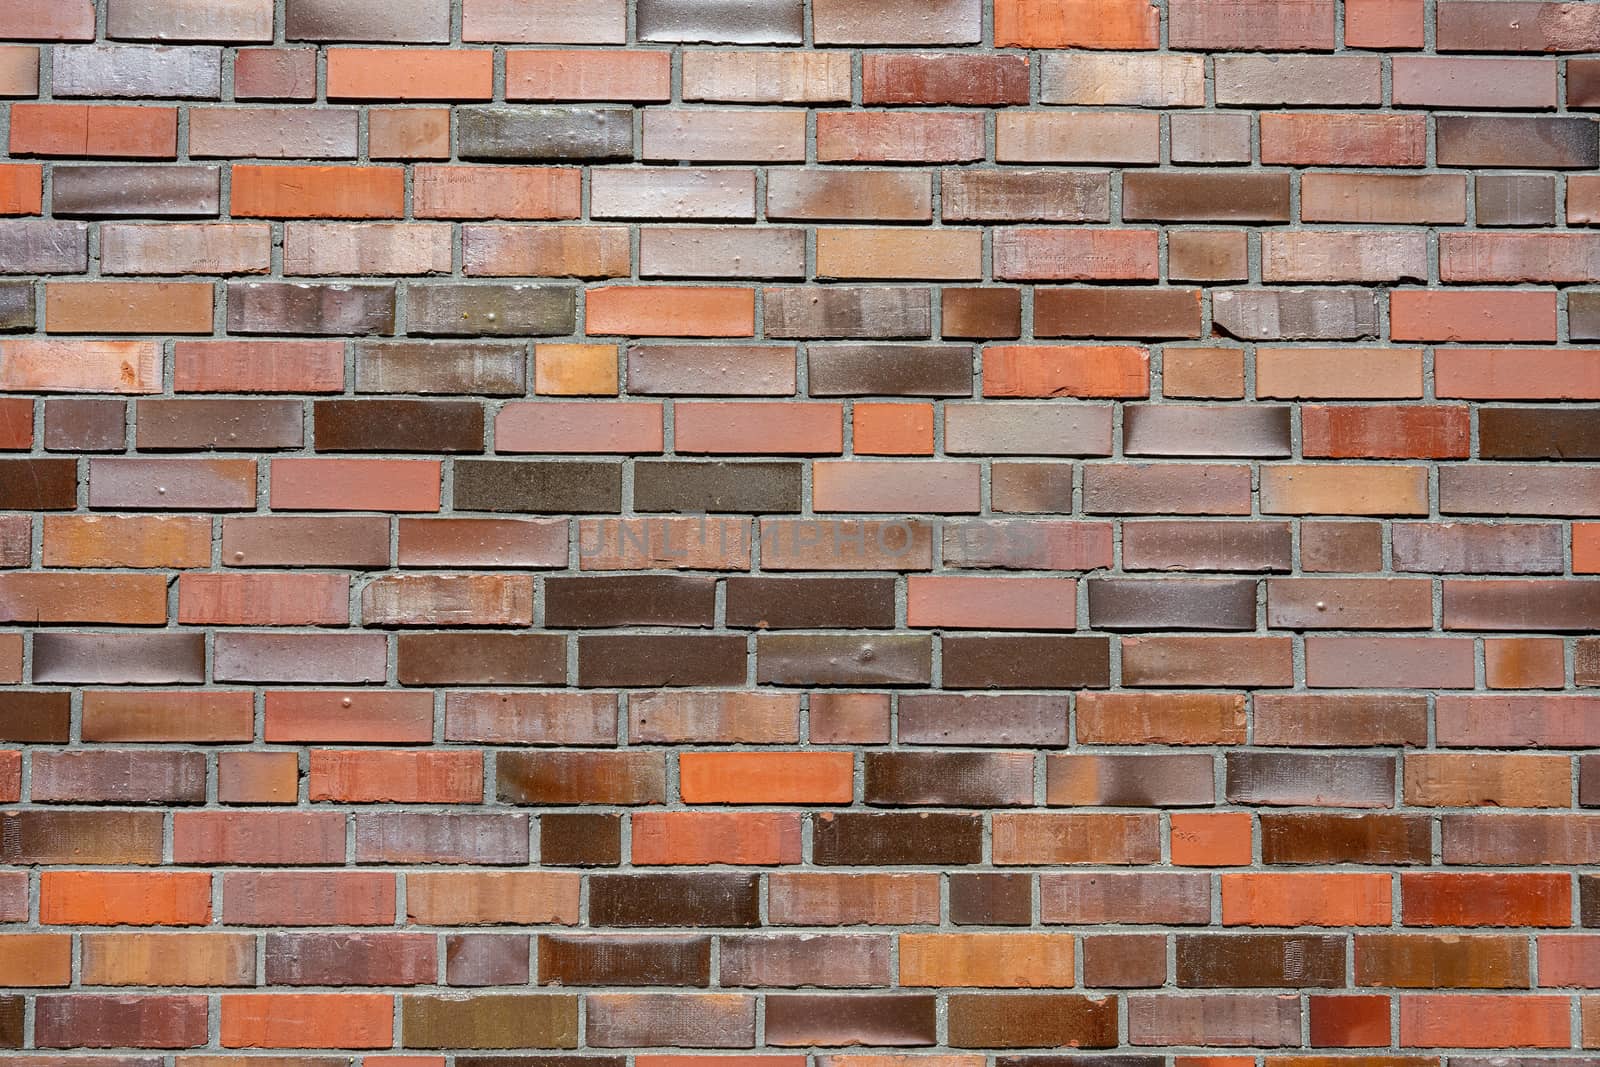 Background from a brick wall with different red tones